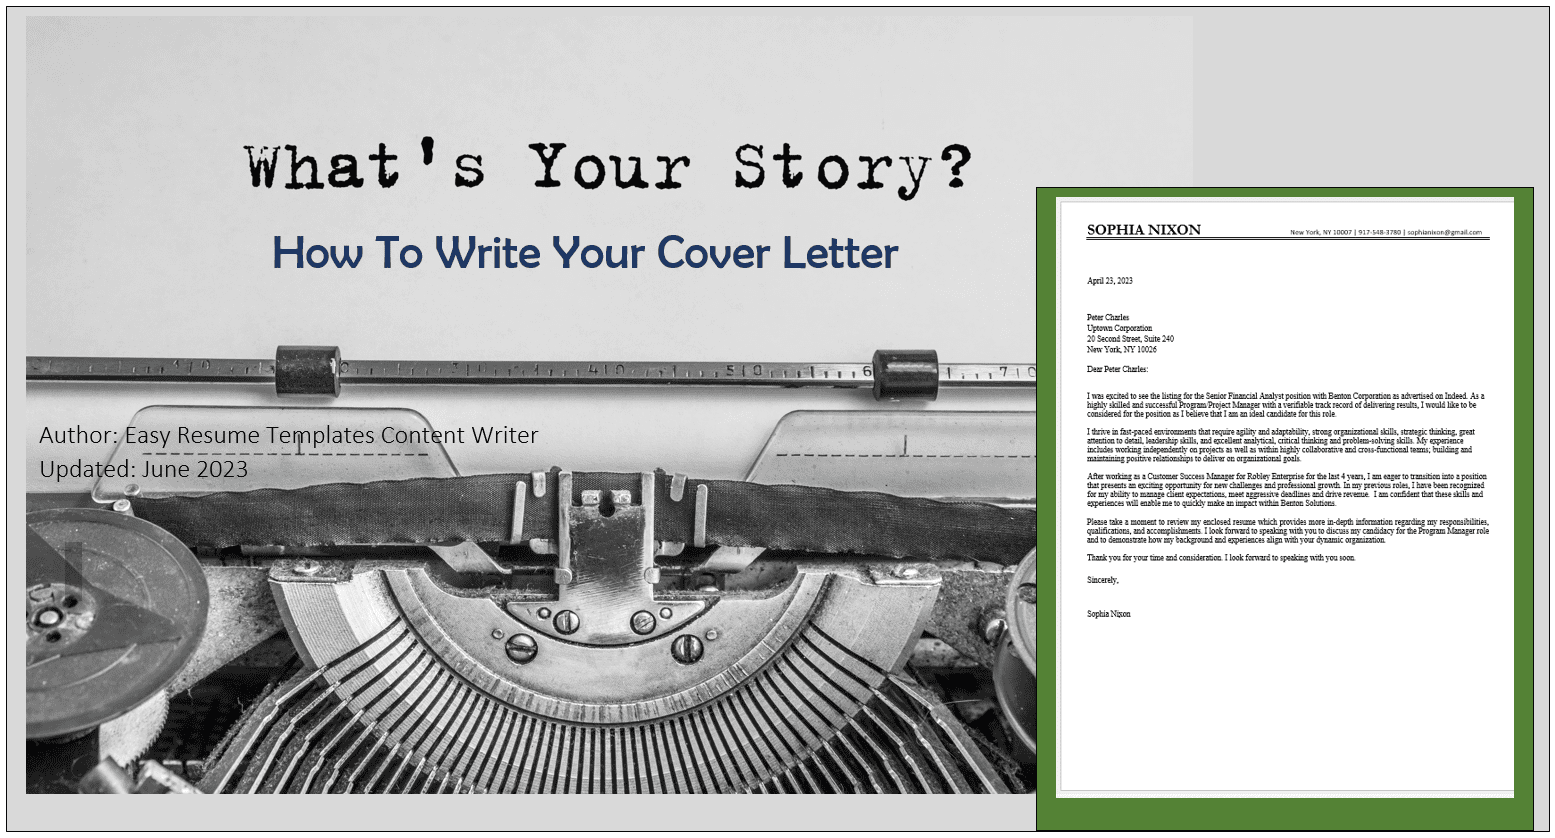 Discover the art of crafting a compelling cover letter as you unravel the secrets of "How To Write Your Cover Letter". Share your unique story with potential employers and seize opportunities like never before.